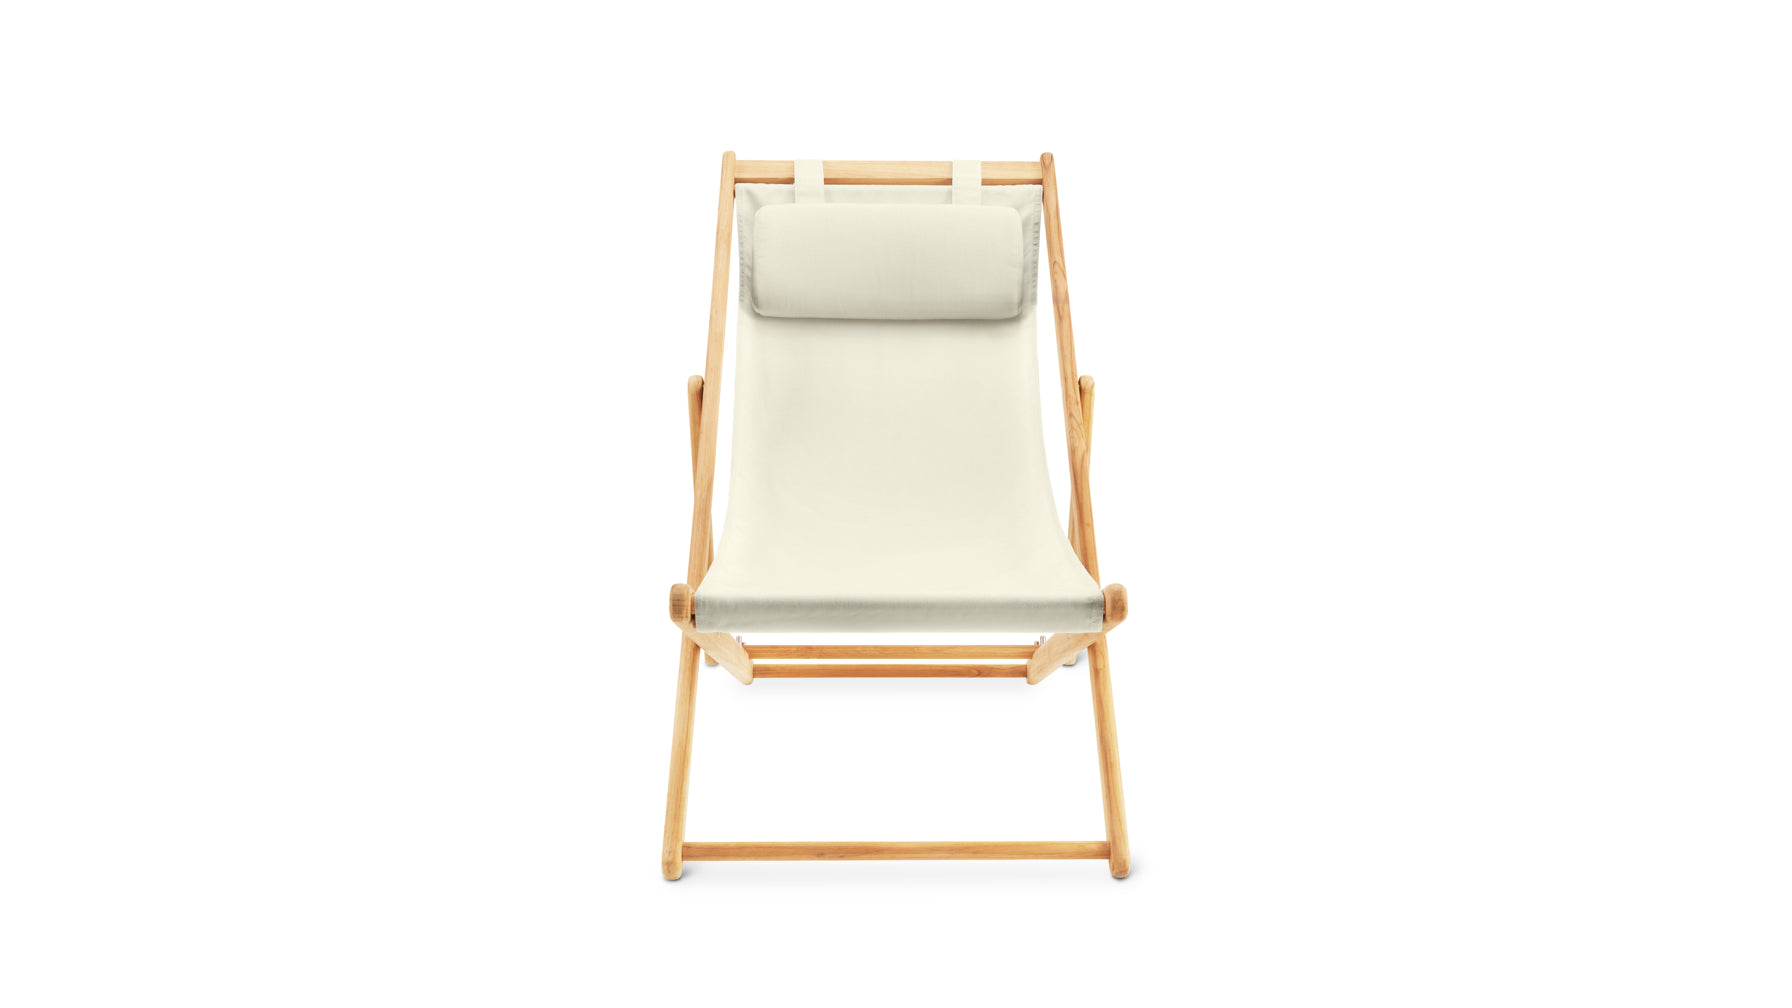 Settle In Outdoor Deck Chair, Canvas - Image 1